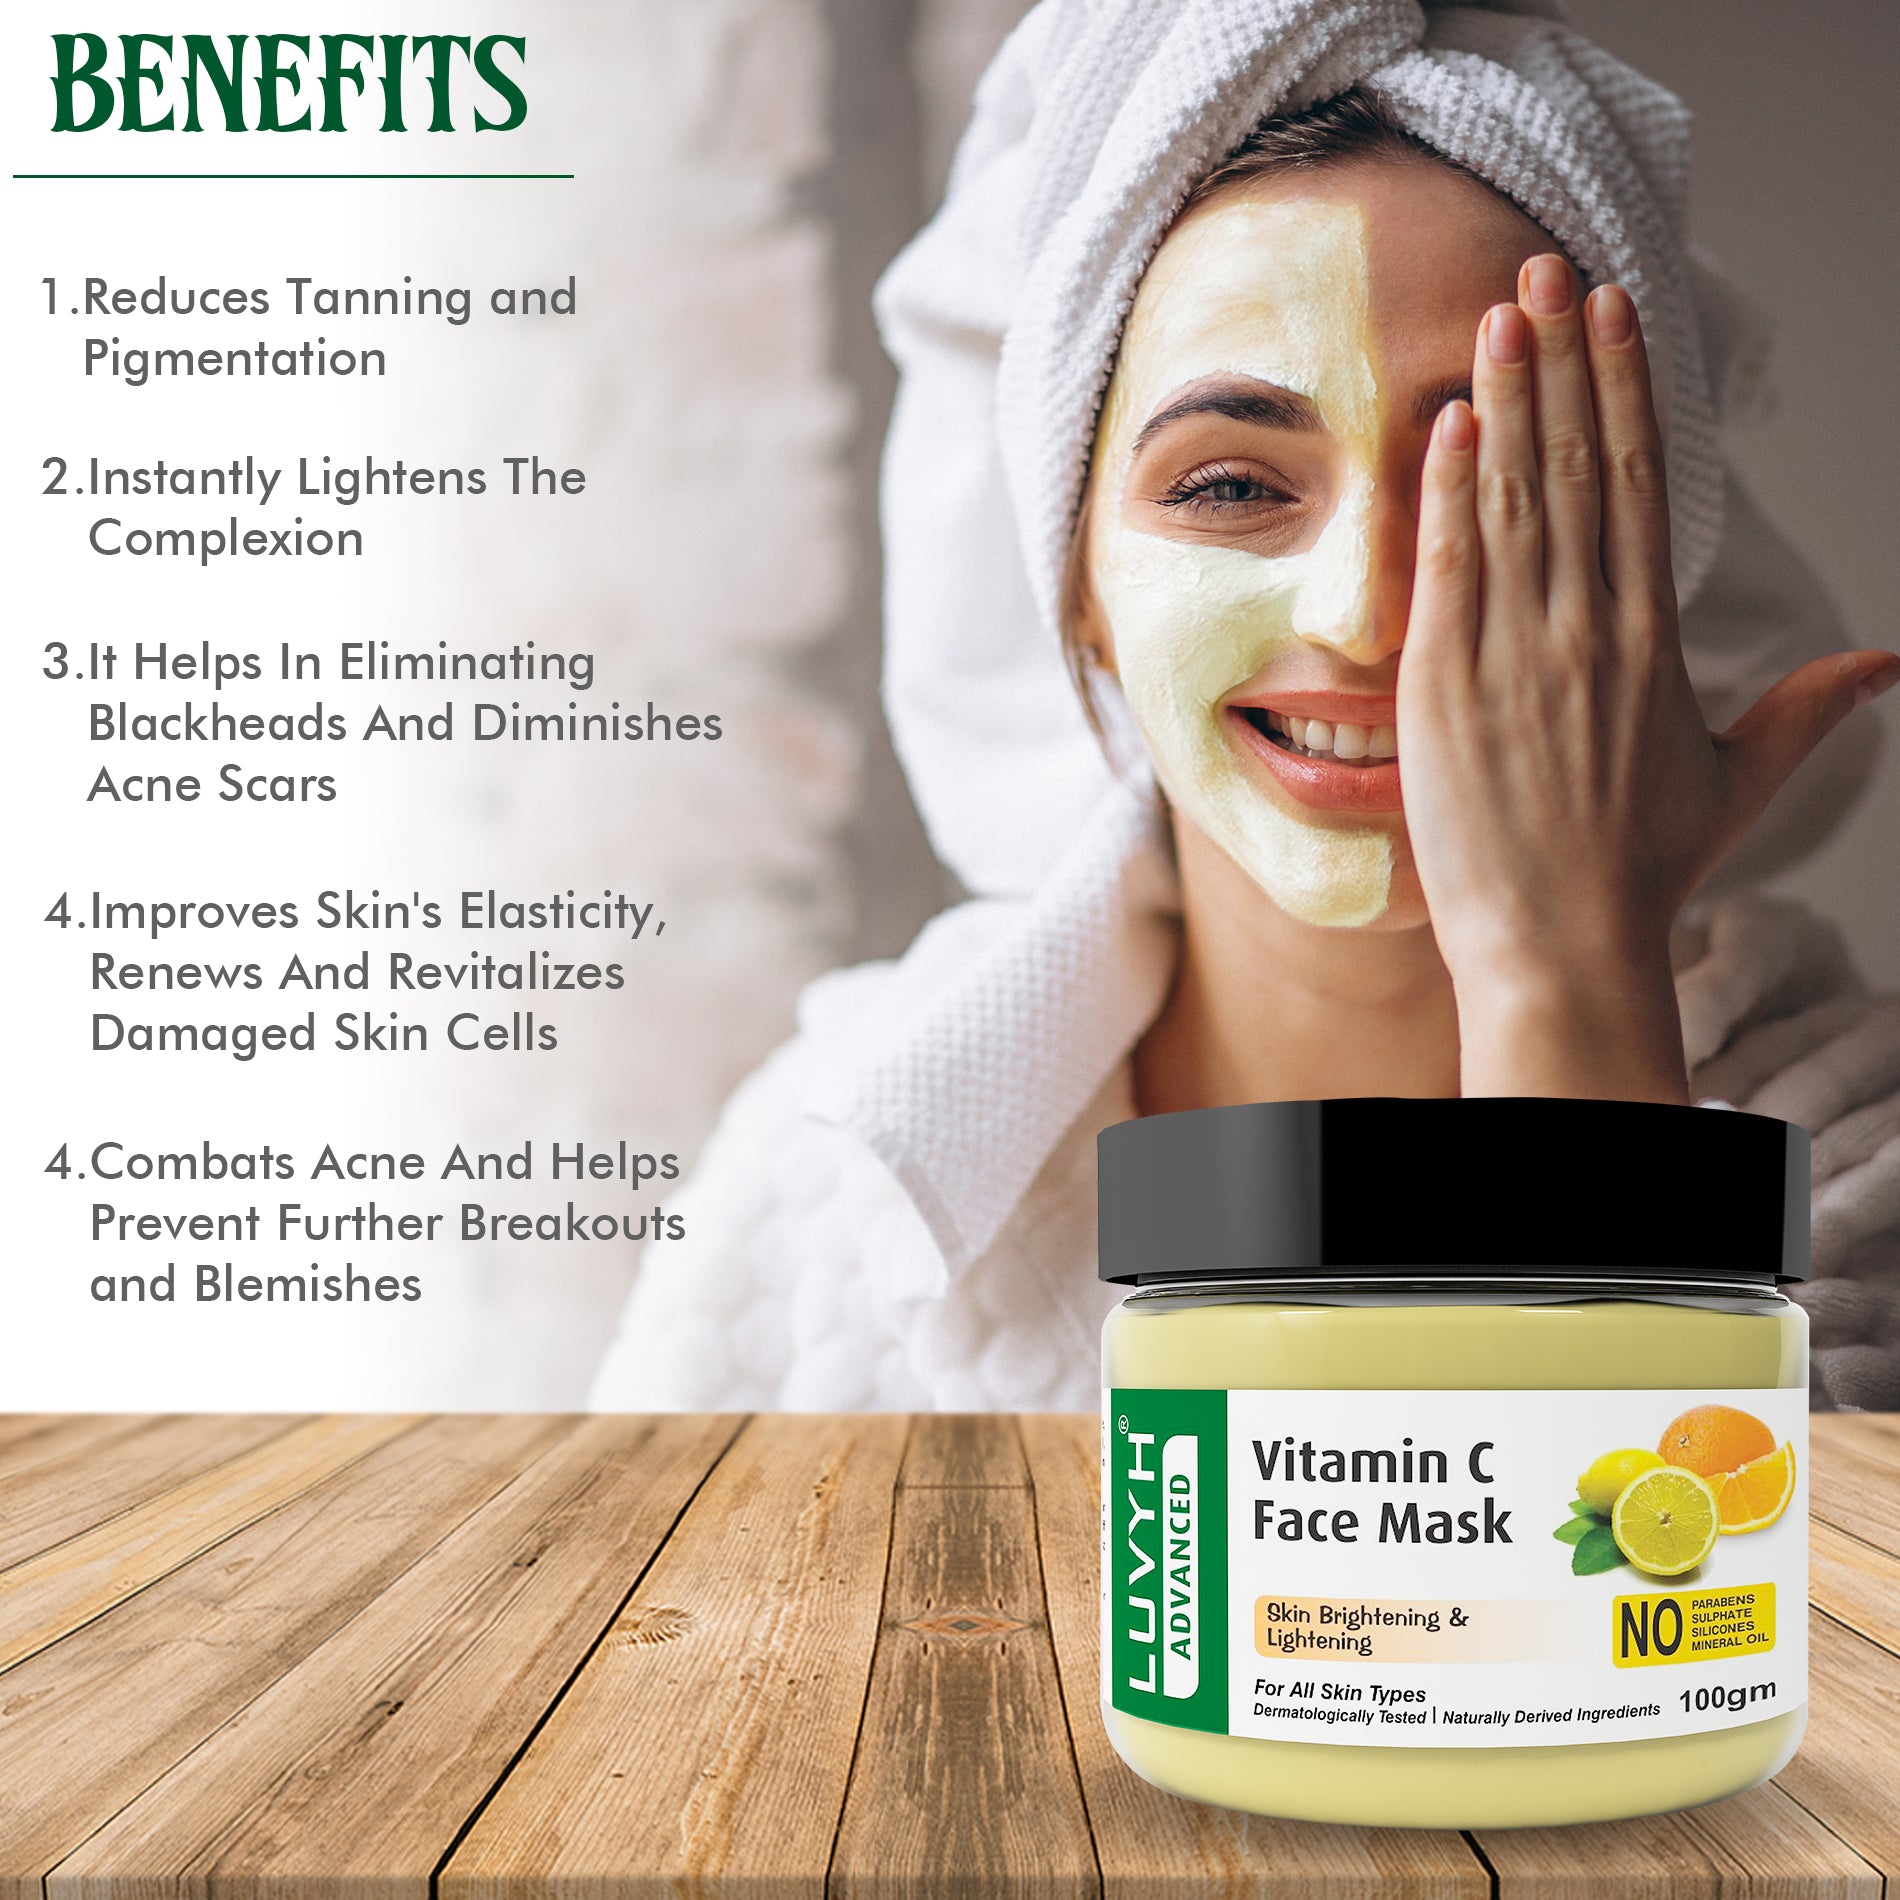 Benefits of Vitamin C Face Mask 